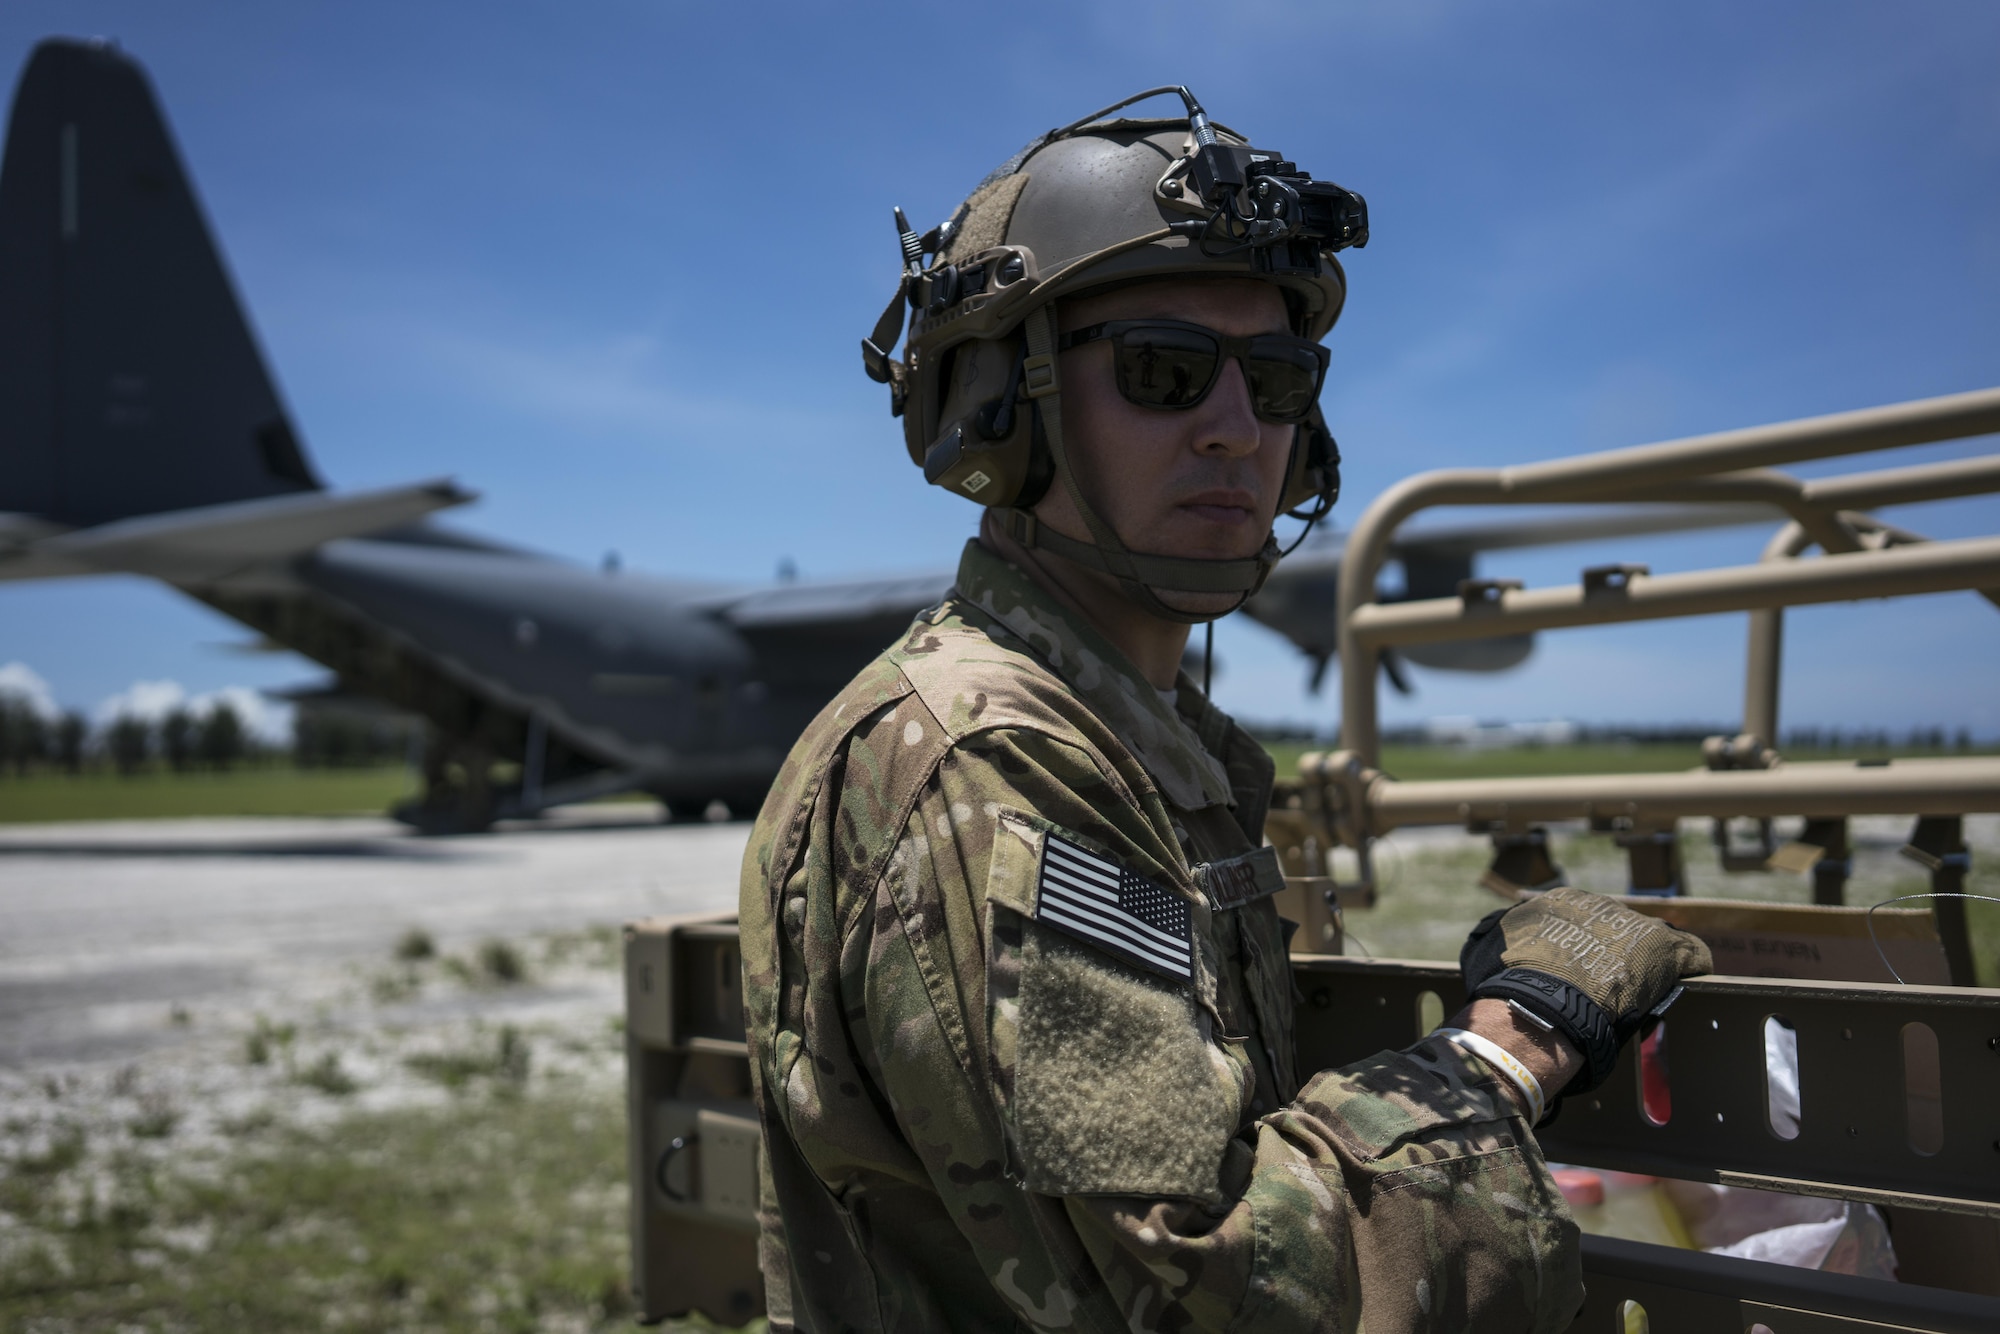 A U.S. Air Force MC-130J Commando II loadmaster assigned to the 17th Special Operations Squadron stands postured to support the rapid infiltration and exfiltration of a tactical vehicle during a mass launch training mission June 22, 2017, at Ie Shima Range, Okinawa, Japan. Airmen from the 17th SOS conduct training operations often to ensure they are always ready perform a variety of high-priority, low-visibility missions throughout the Indo-Asia-Pacific-Region. (U.S. Air Force photo by Capt. Jessica Tait)